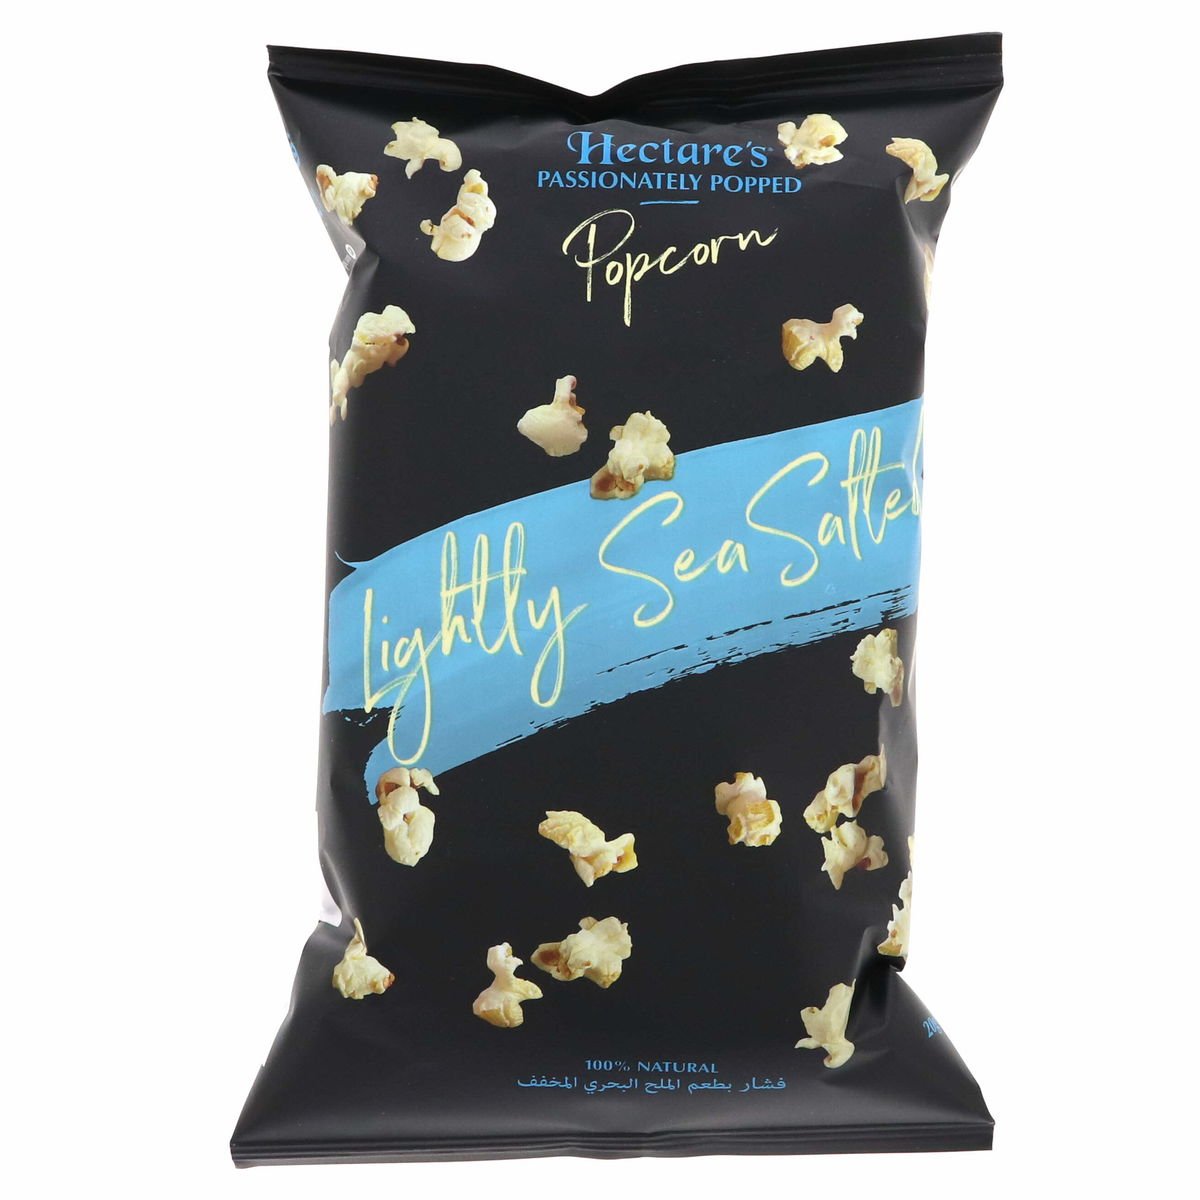 Hectare's Lightly Sea Salted Popcorn 20g